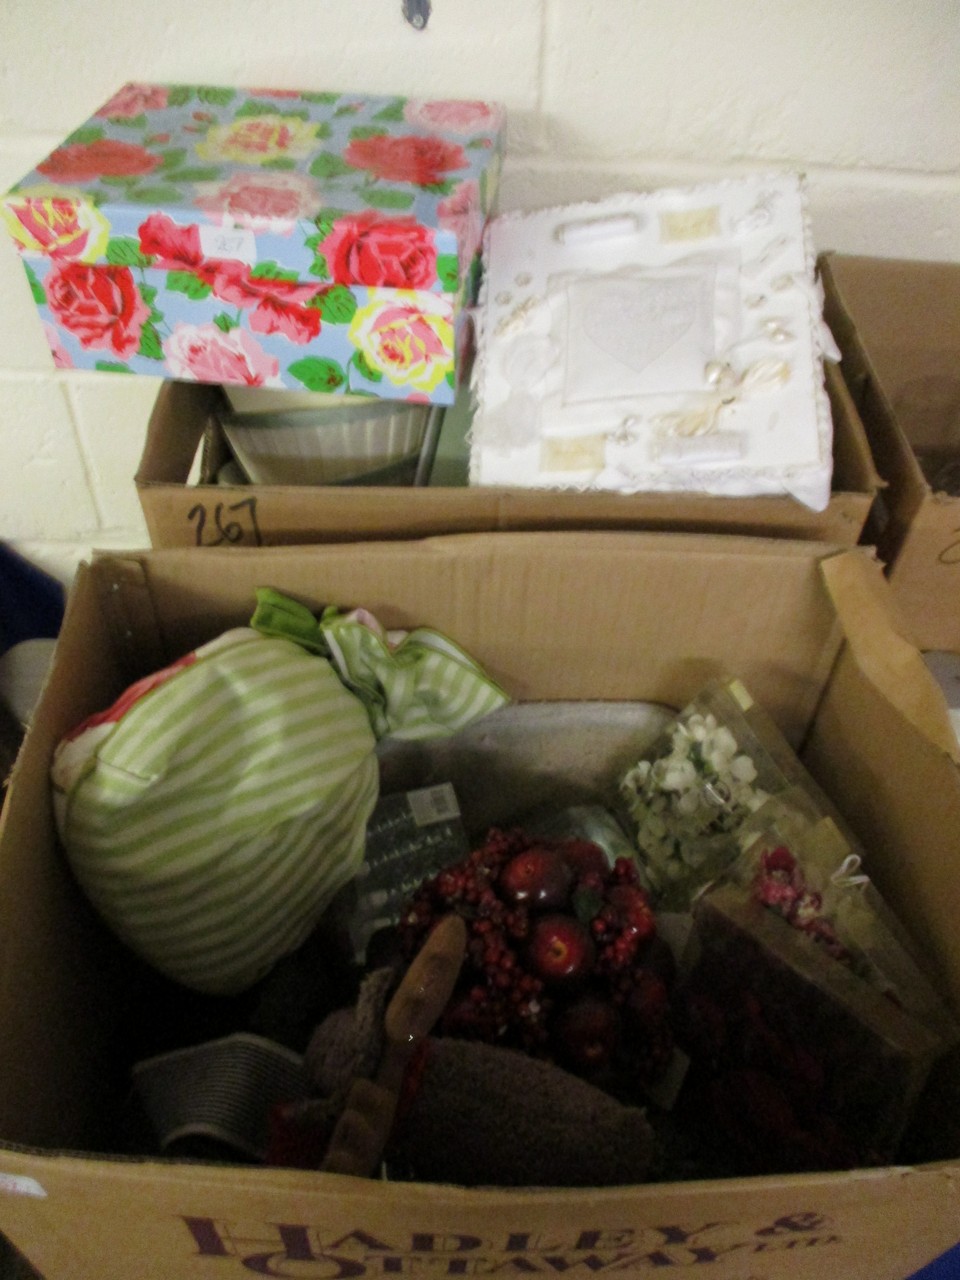 TWO BOXES OF MIXED SUNDRIES, ORNAMENTS ETC